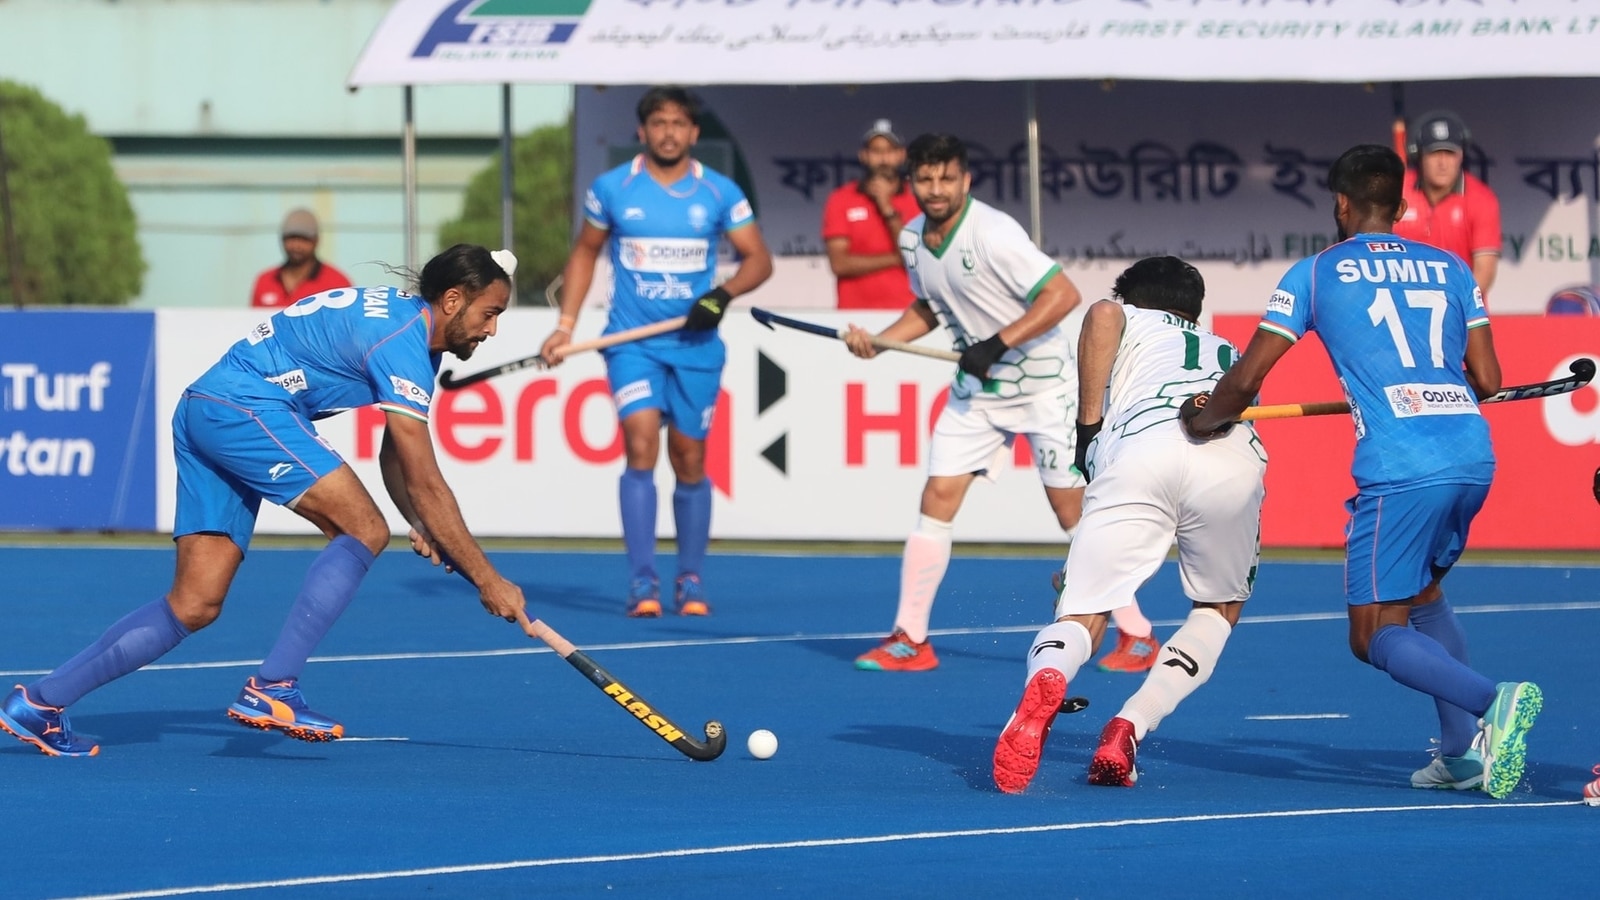 India vs Pakistan Highlights India beat Pakistan 4-3 to secure third-place finish and win bronze medal Hindustan Times